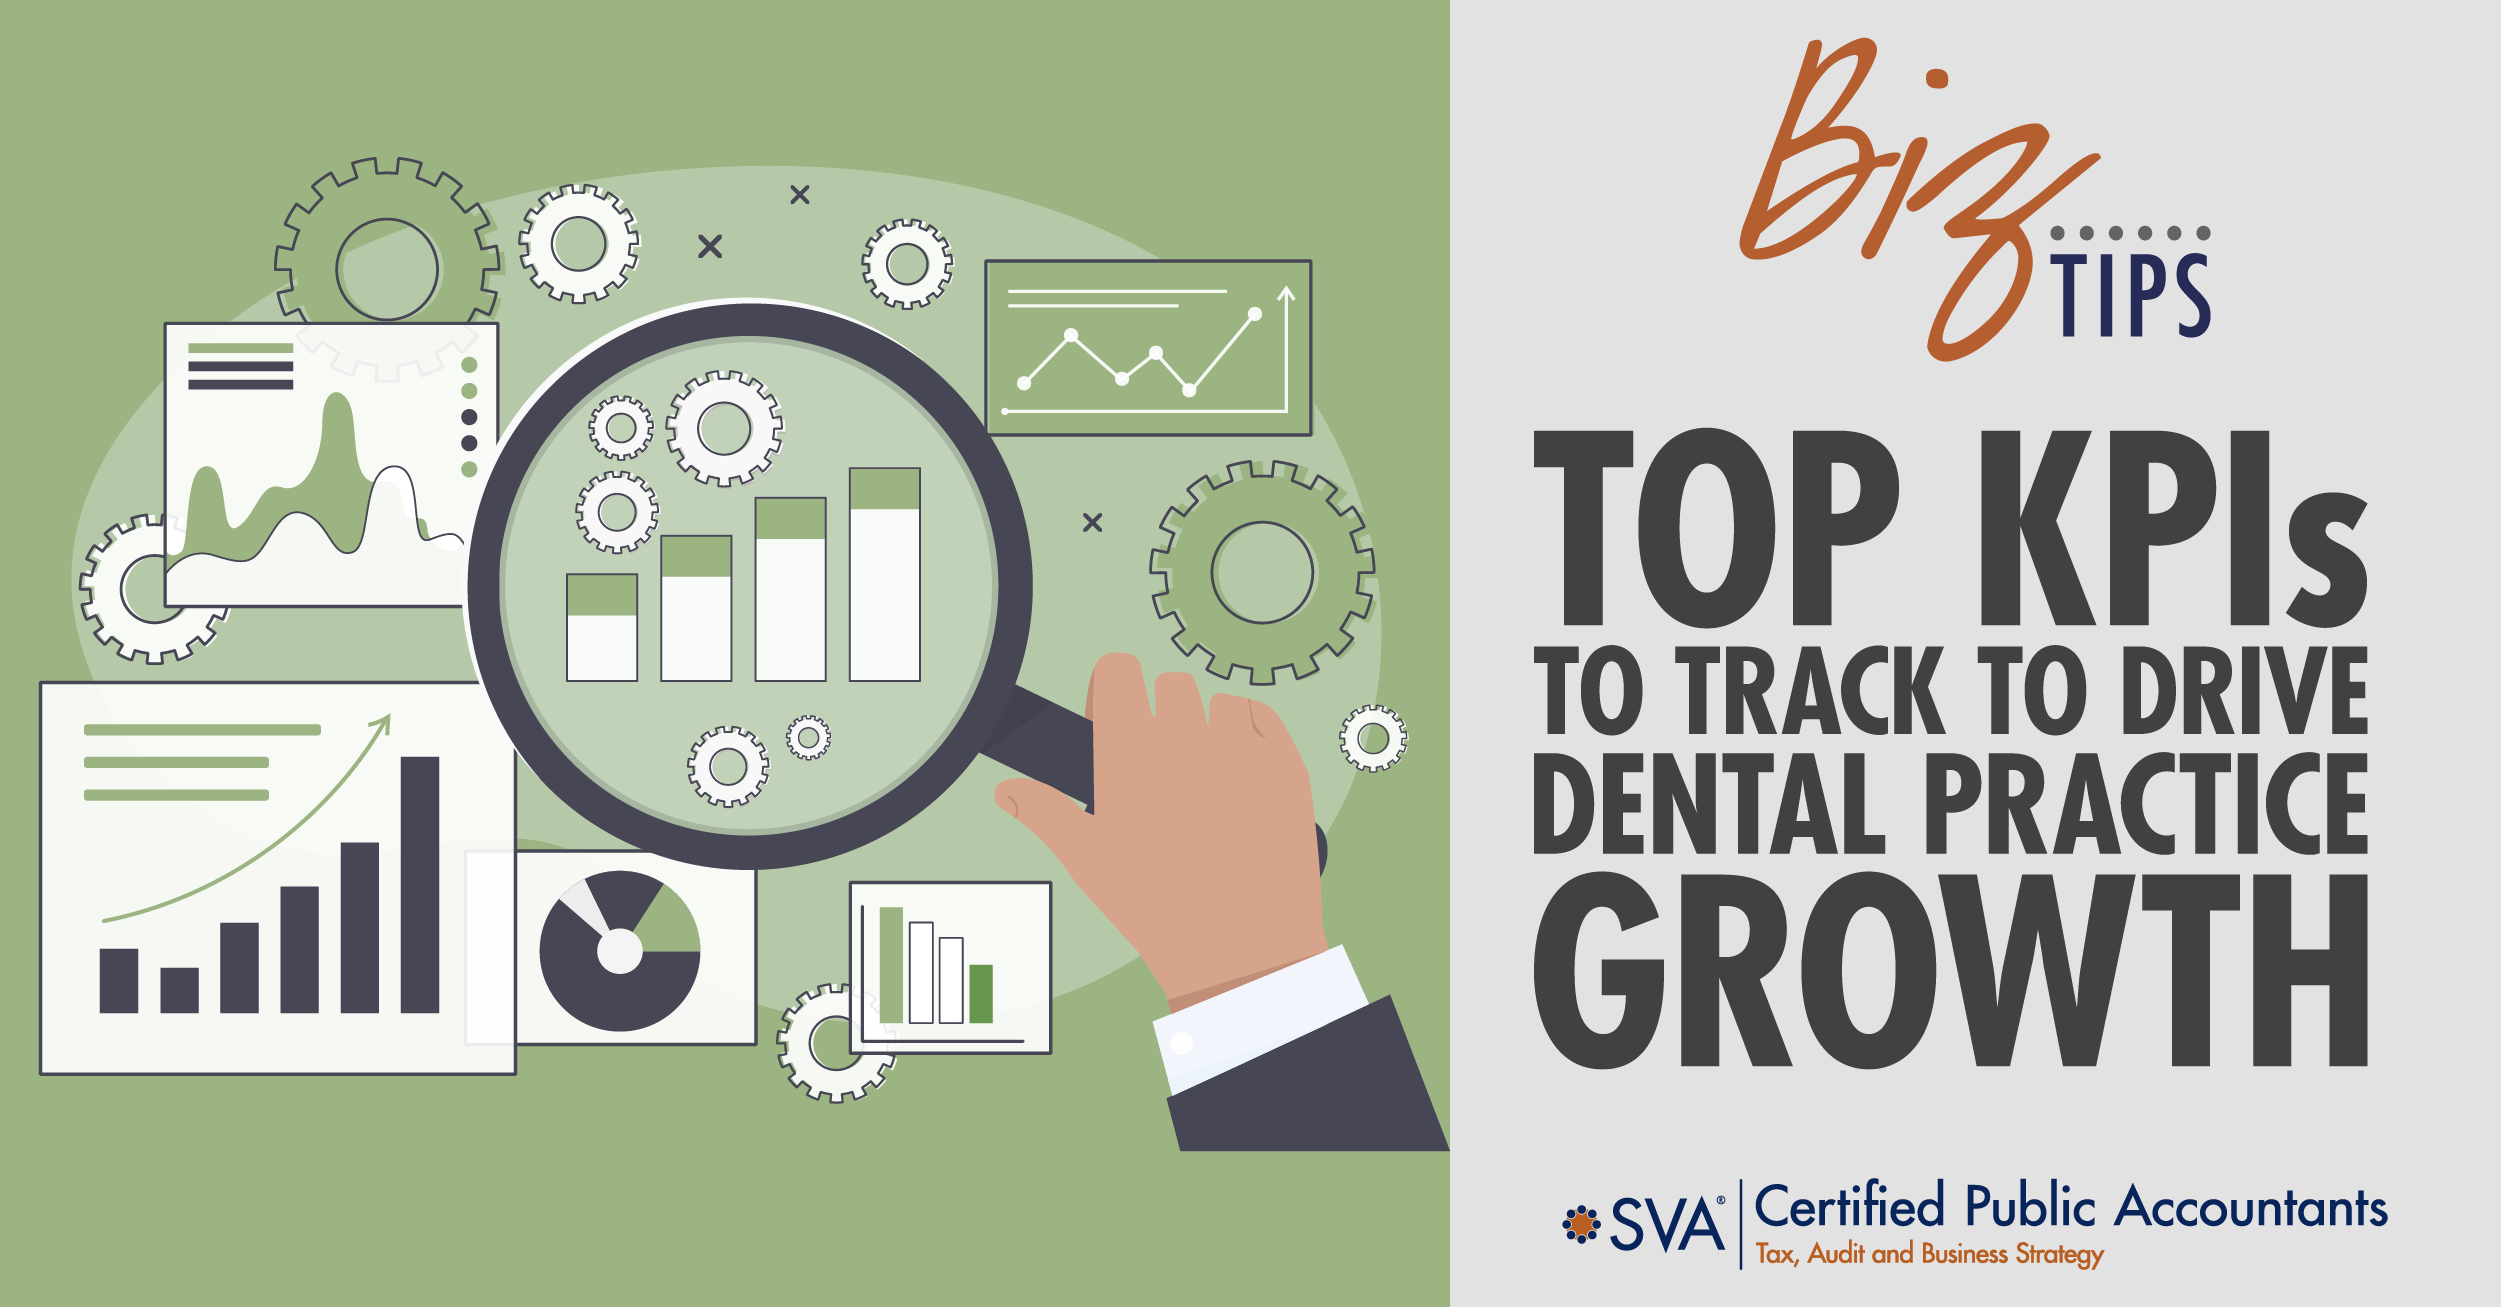 Top KPIs to Track and Drive Dental Practice Growth